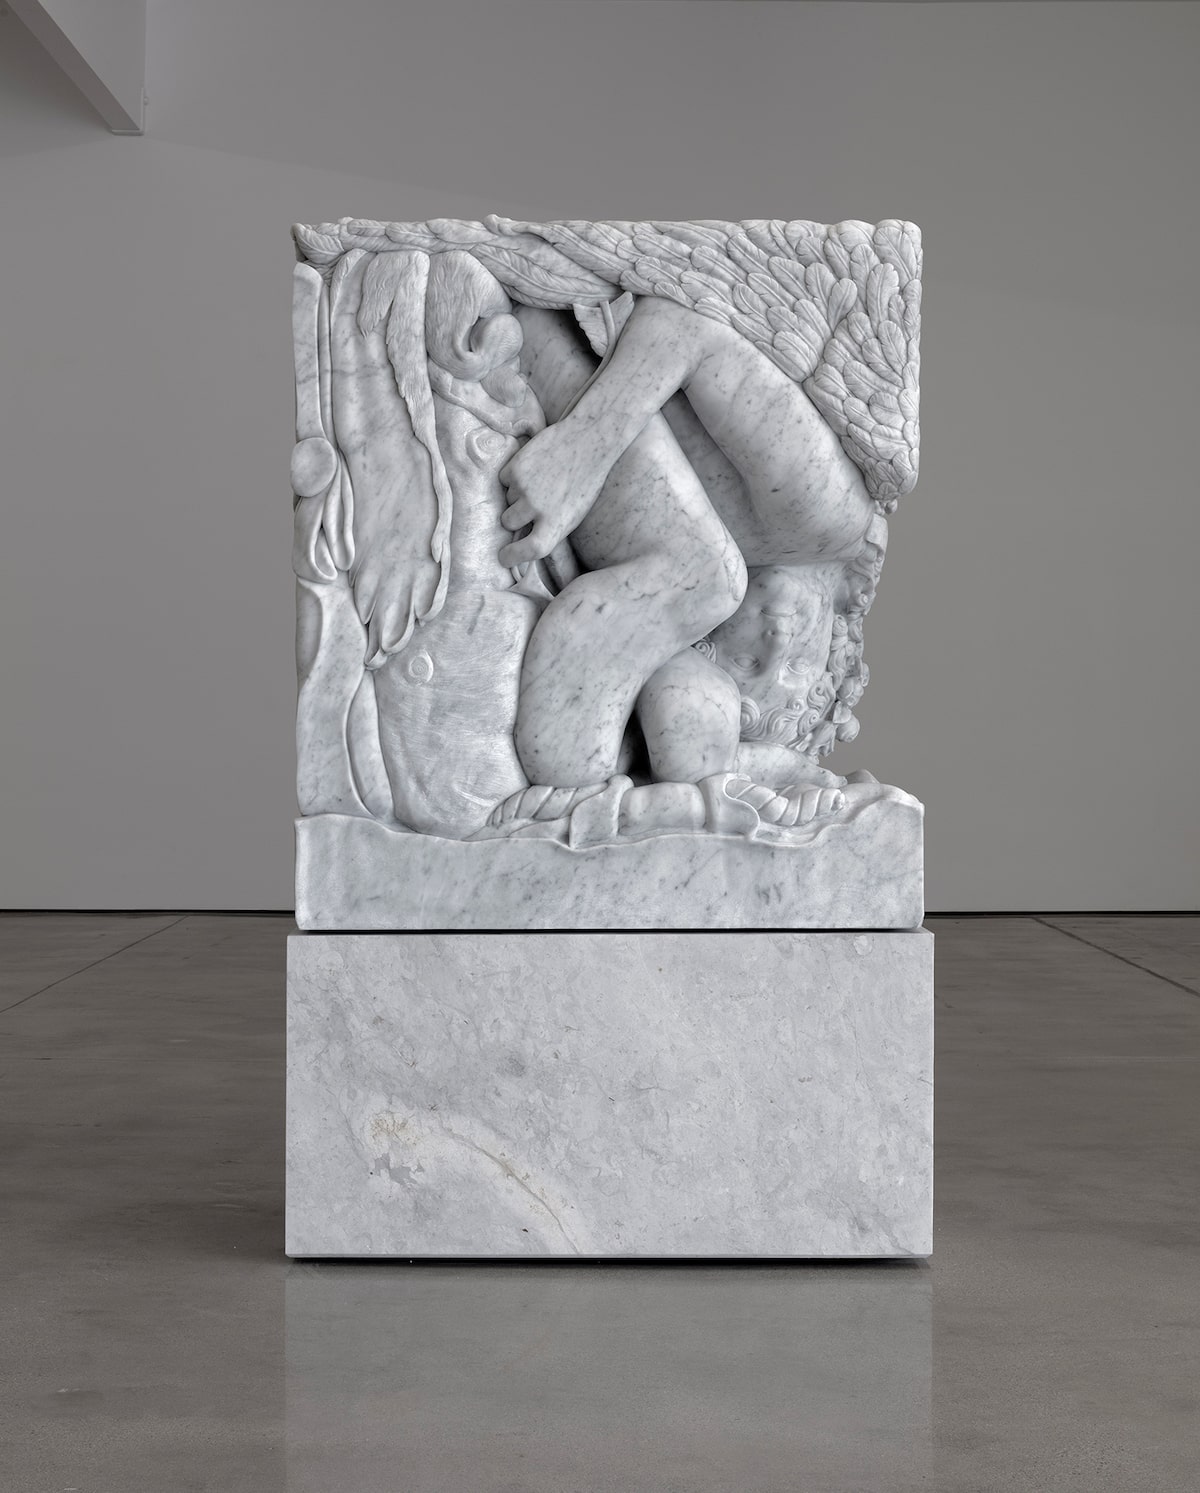 Artist Adam Parker Smith Compresses Classical Sculptures Into Small Marble Cubes (7)